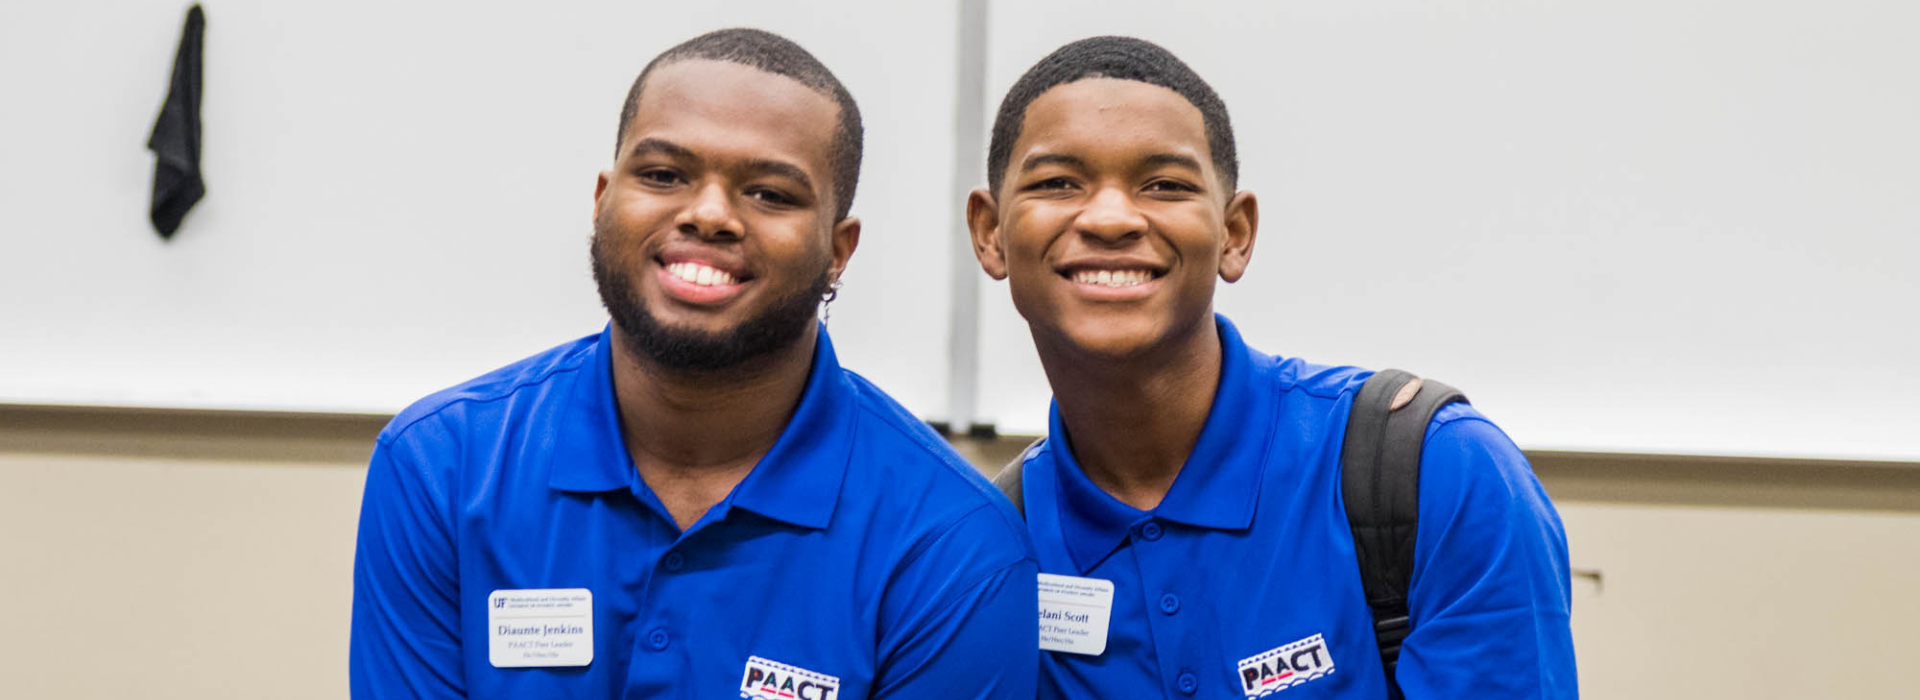 two PaaCT student staff members smiling and looking at the camera